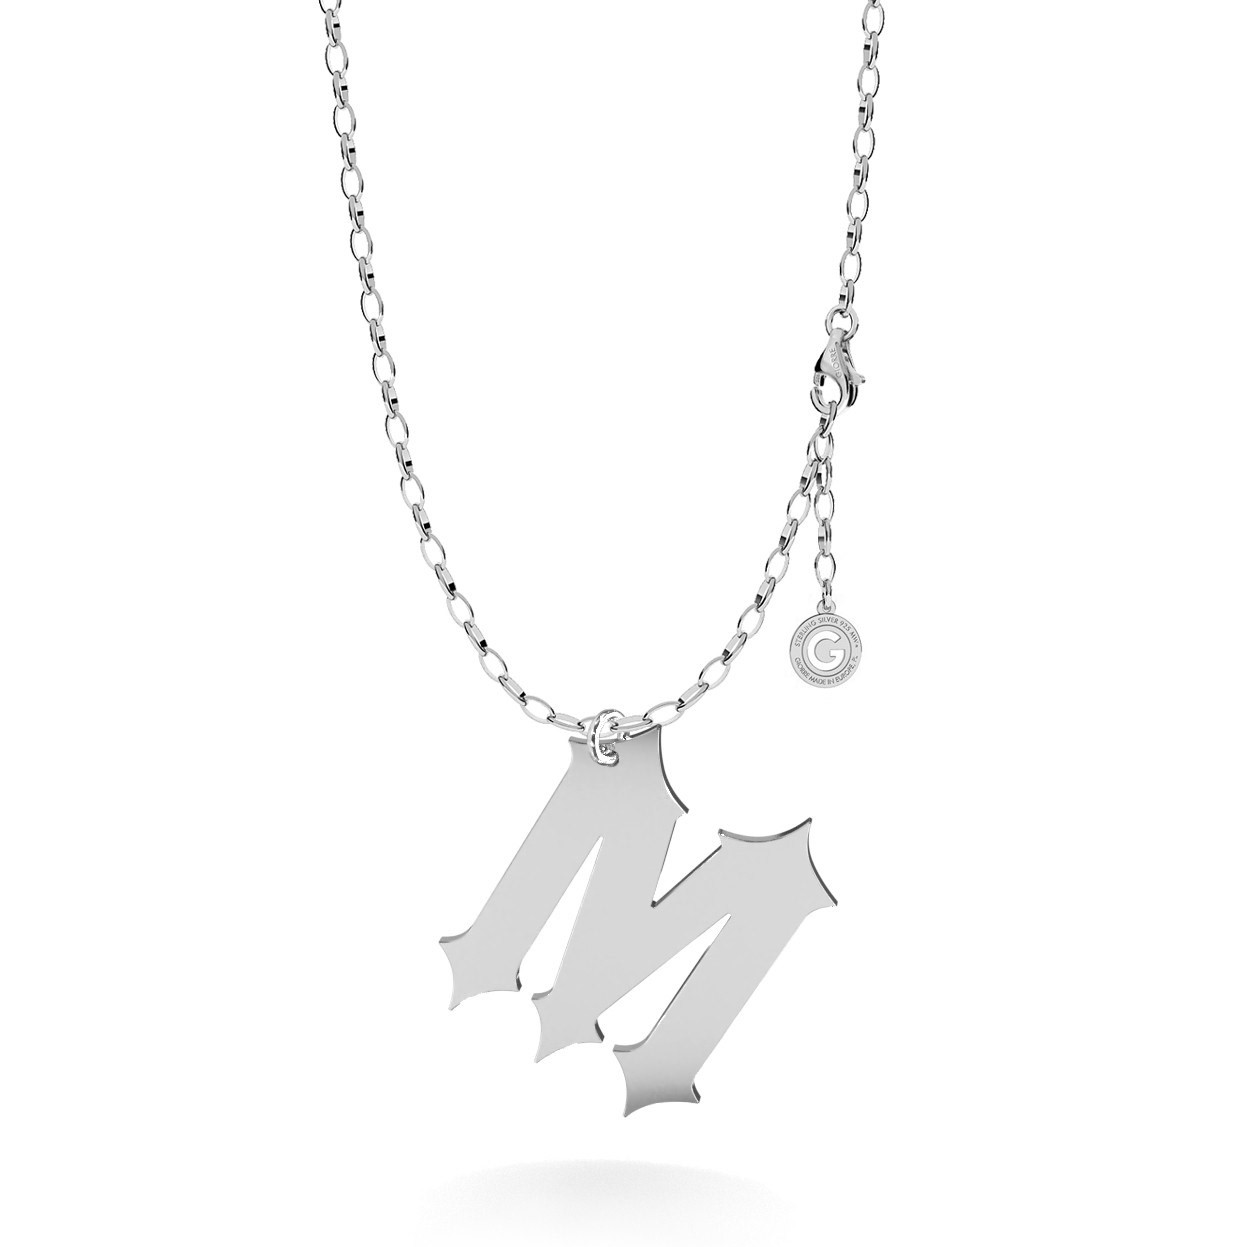 Necklace with big letter A, sterling silver 925